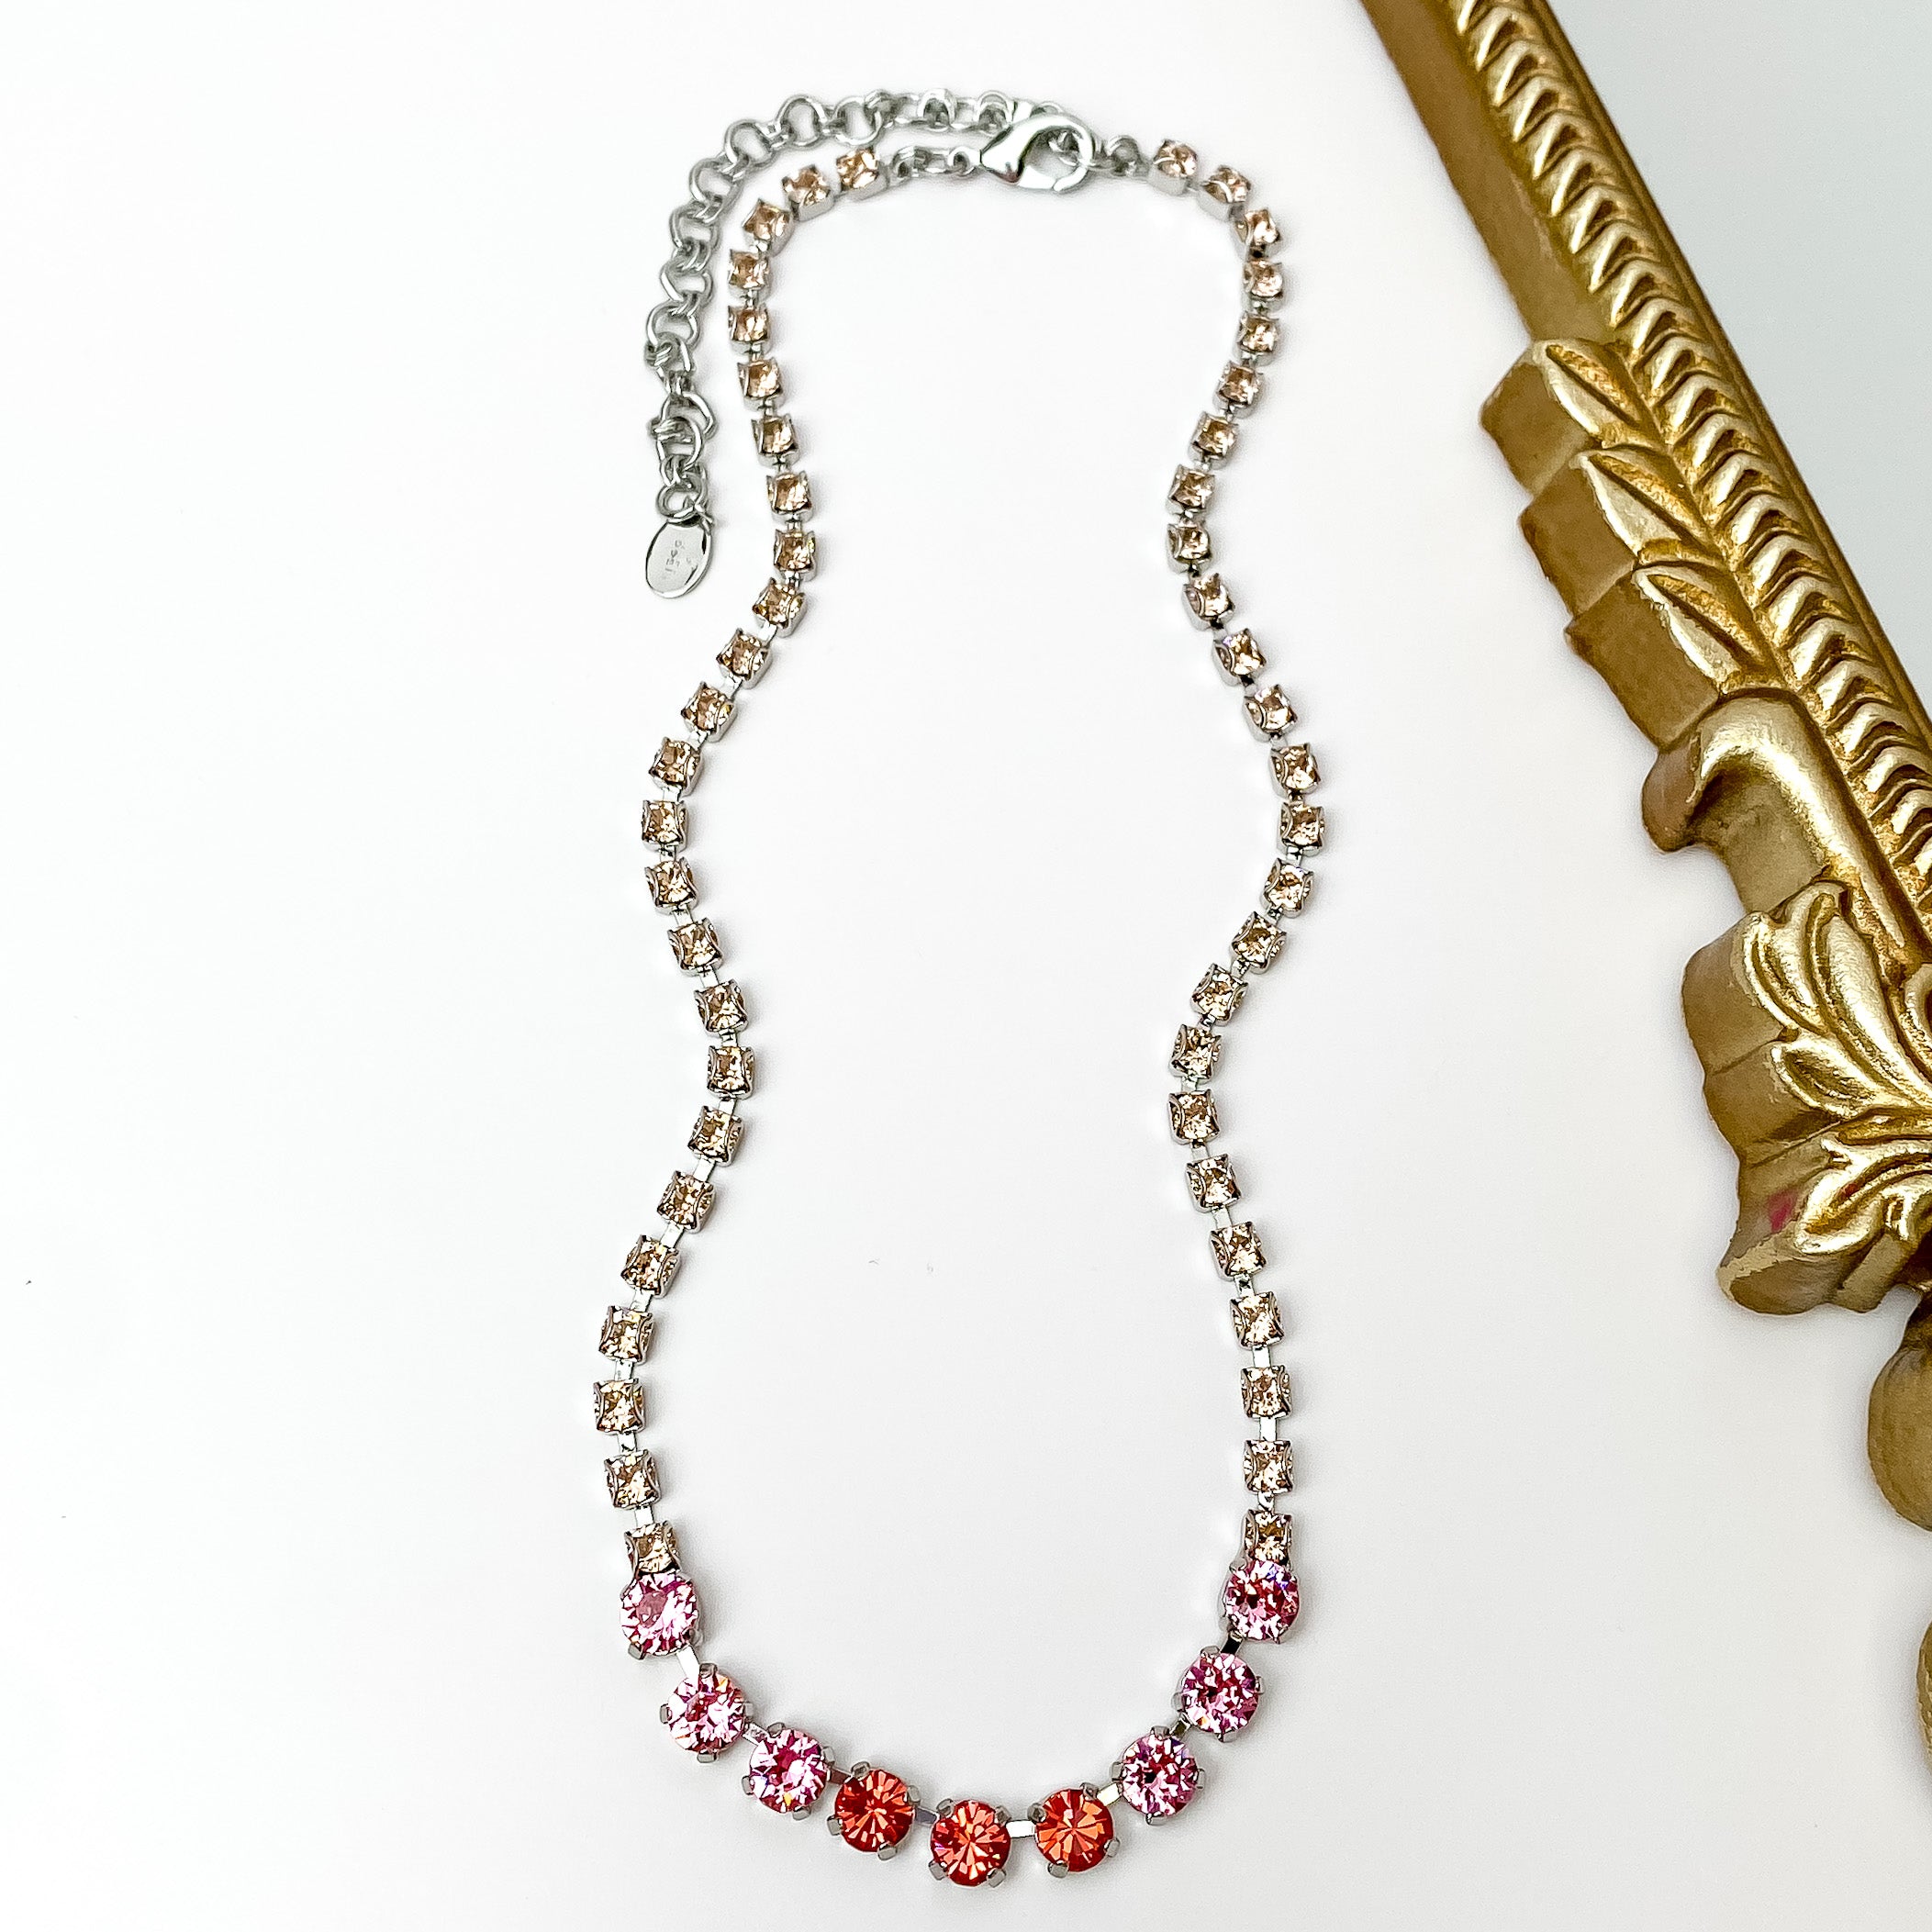 Pictured is a silver necklace with a mix of pink crystals. This necklace is pictured on a white background with a gold mirror on the right side.